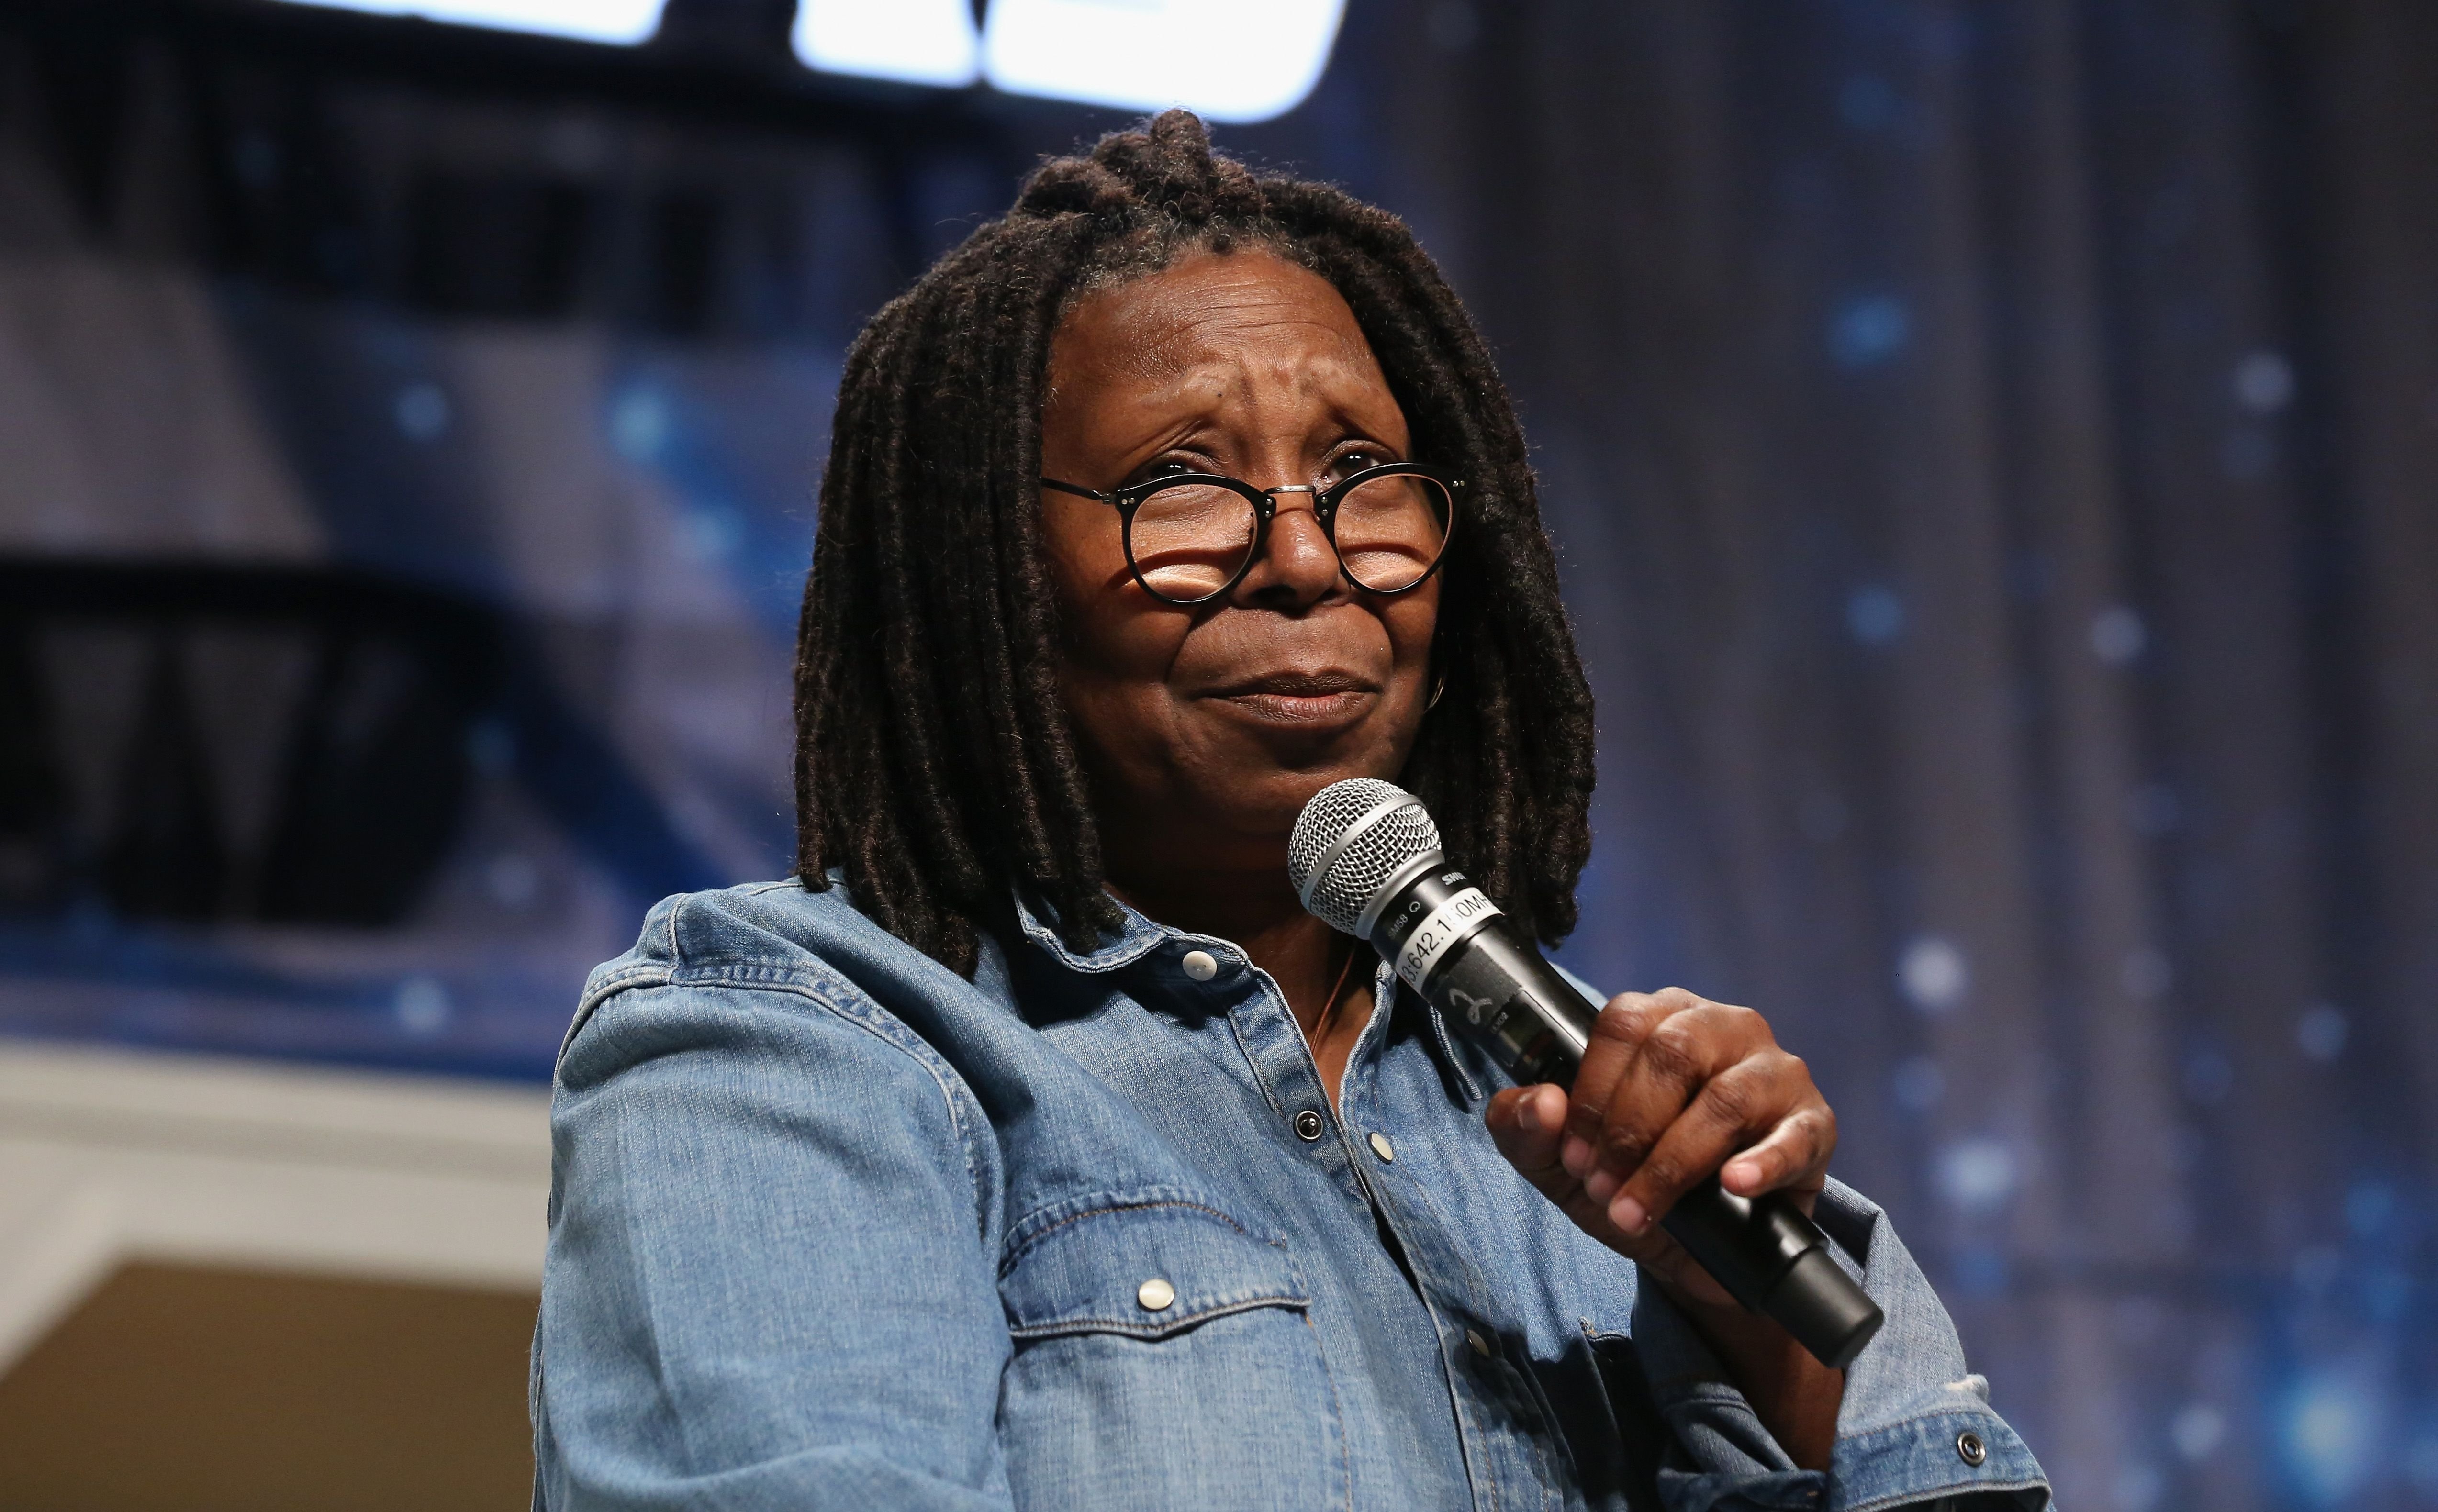 Whoopi Goldberg at the 15th annual official Star Trek convention on Aug. 4, 2016 | Photo: Getty Images